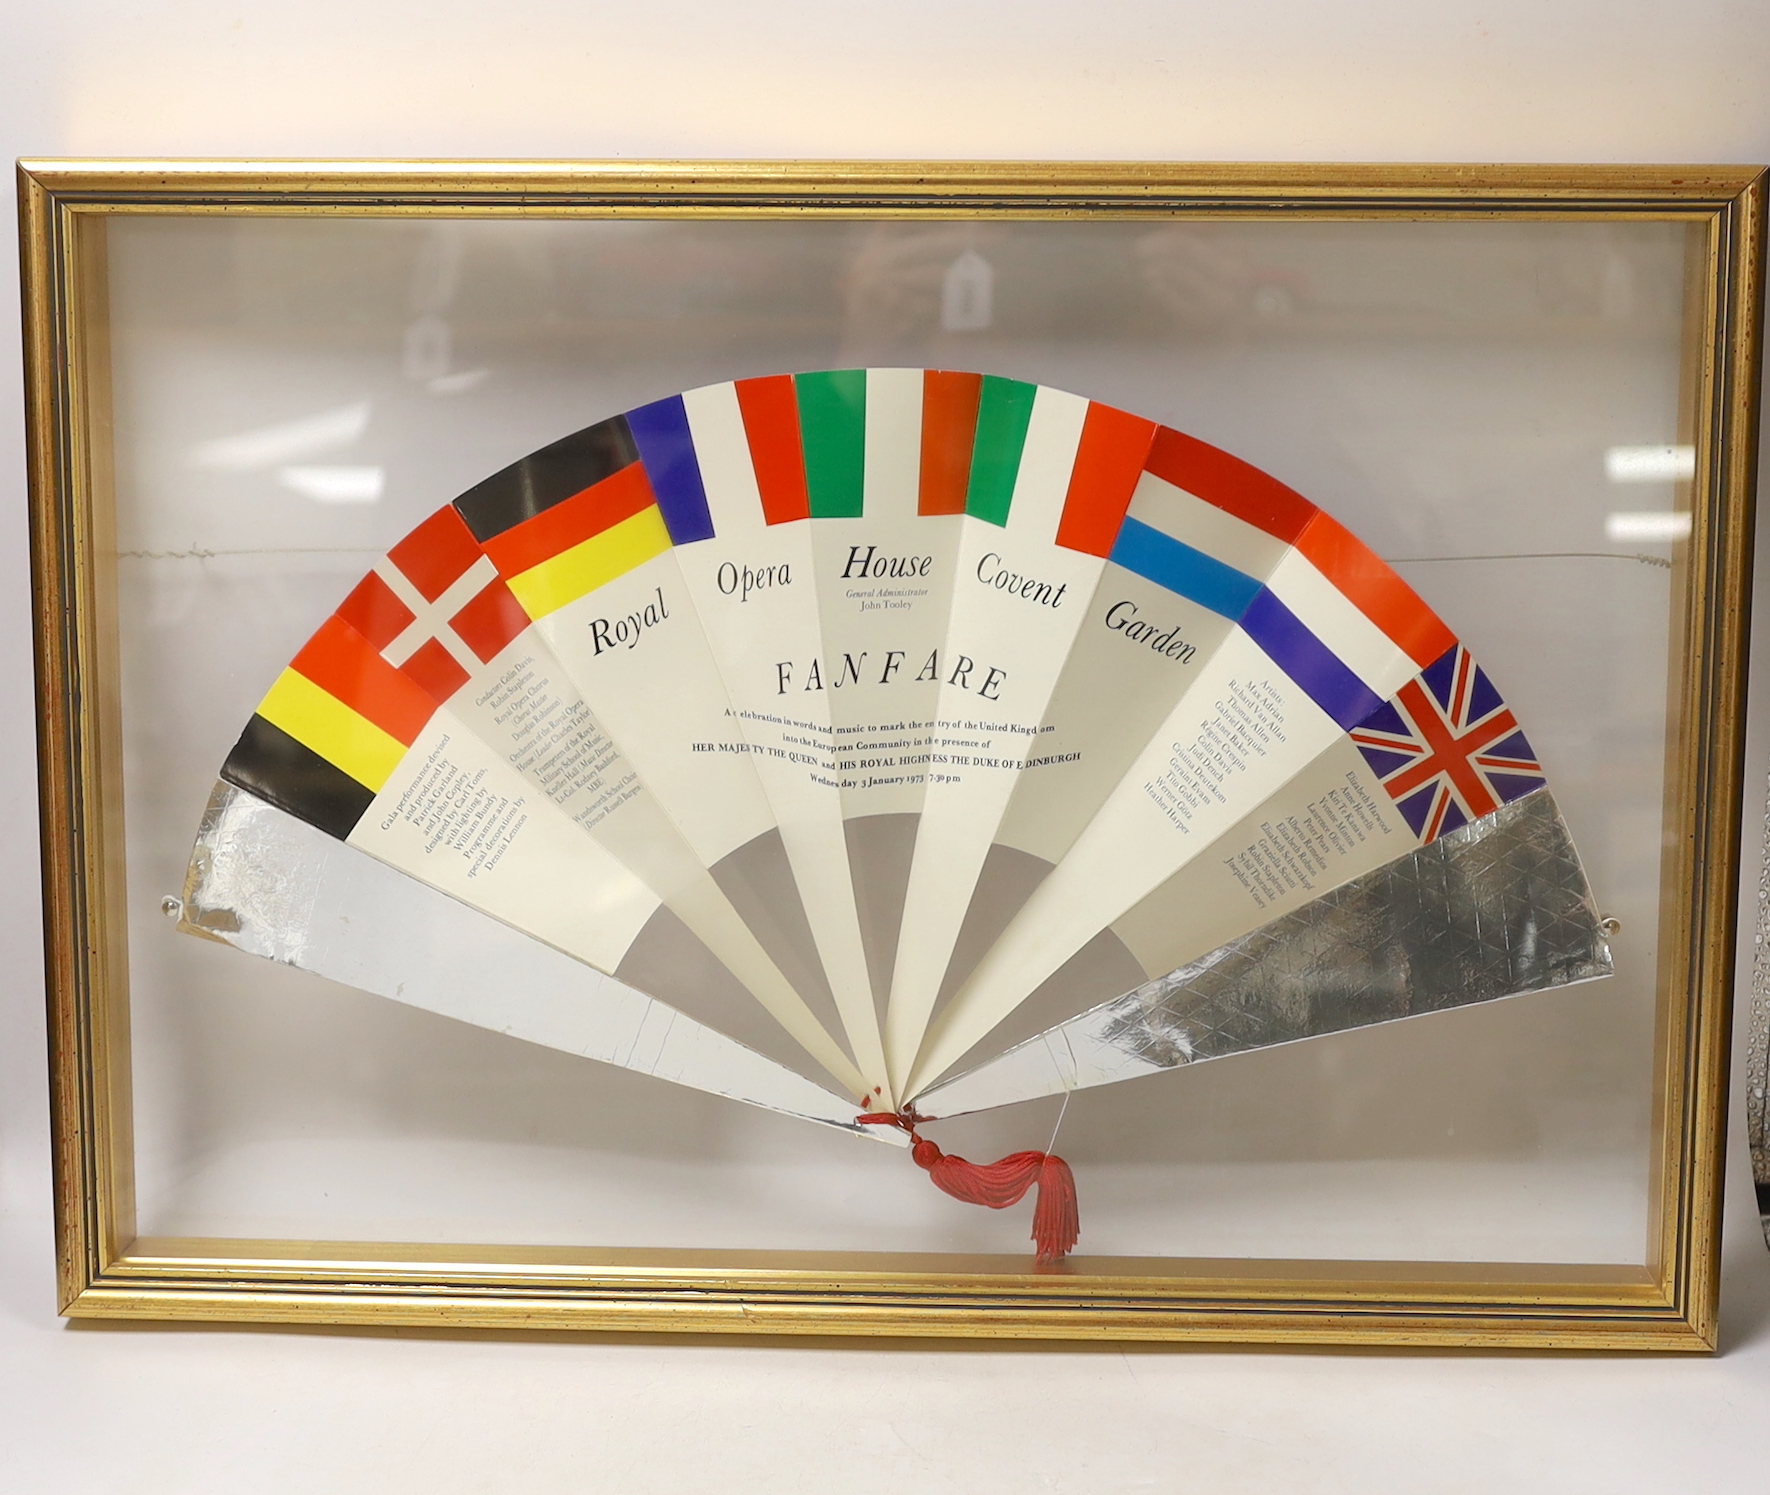 A Royal Opera House, Covent Garden cased programme in the form of a fan, ‘Fanfare’ 3 January 1973, frame dimensions 41 x 58.5cm